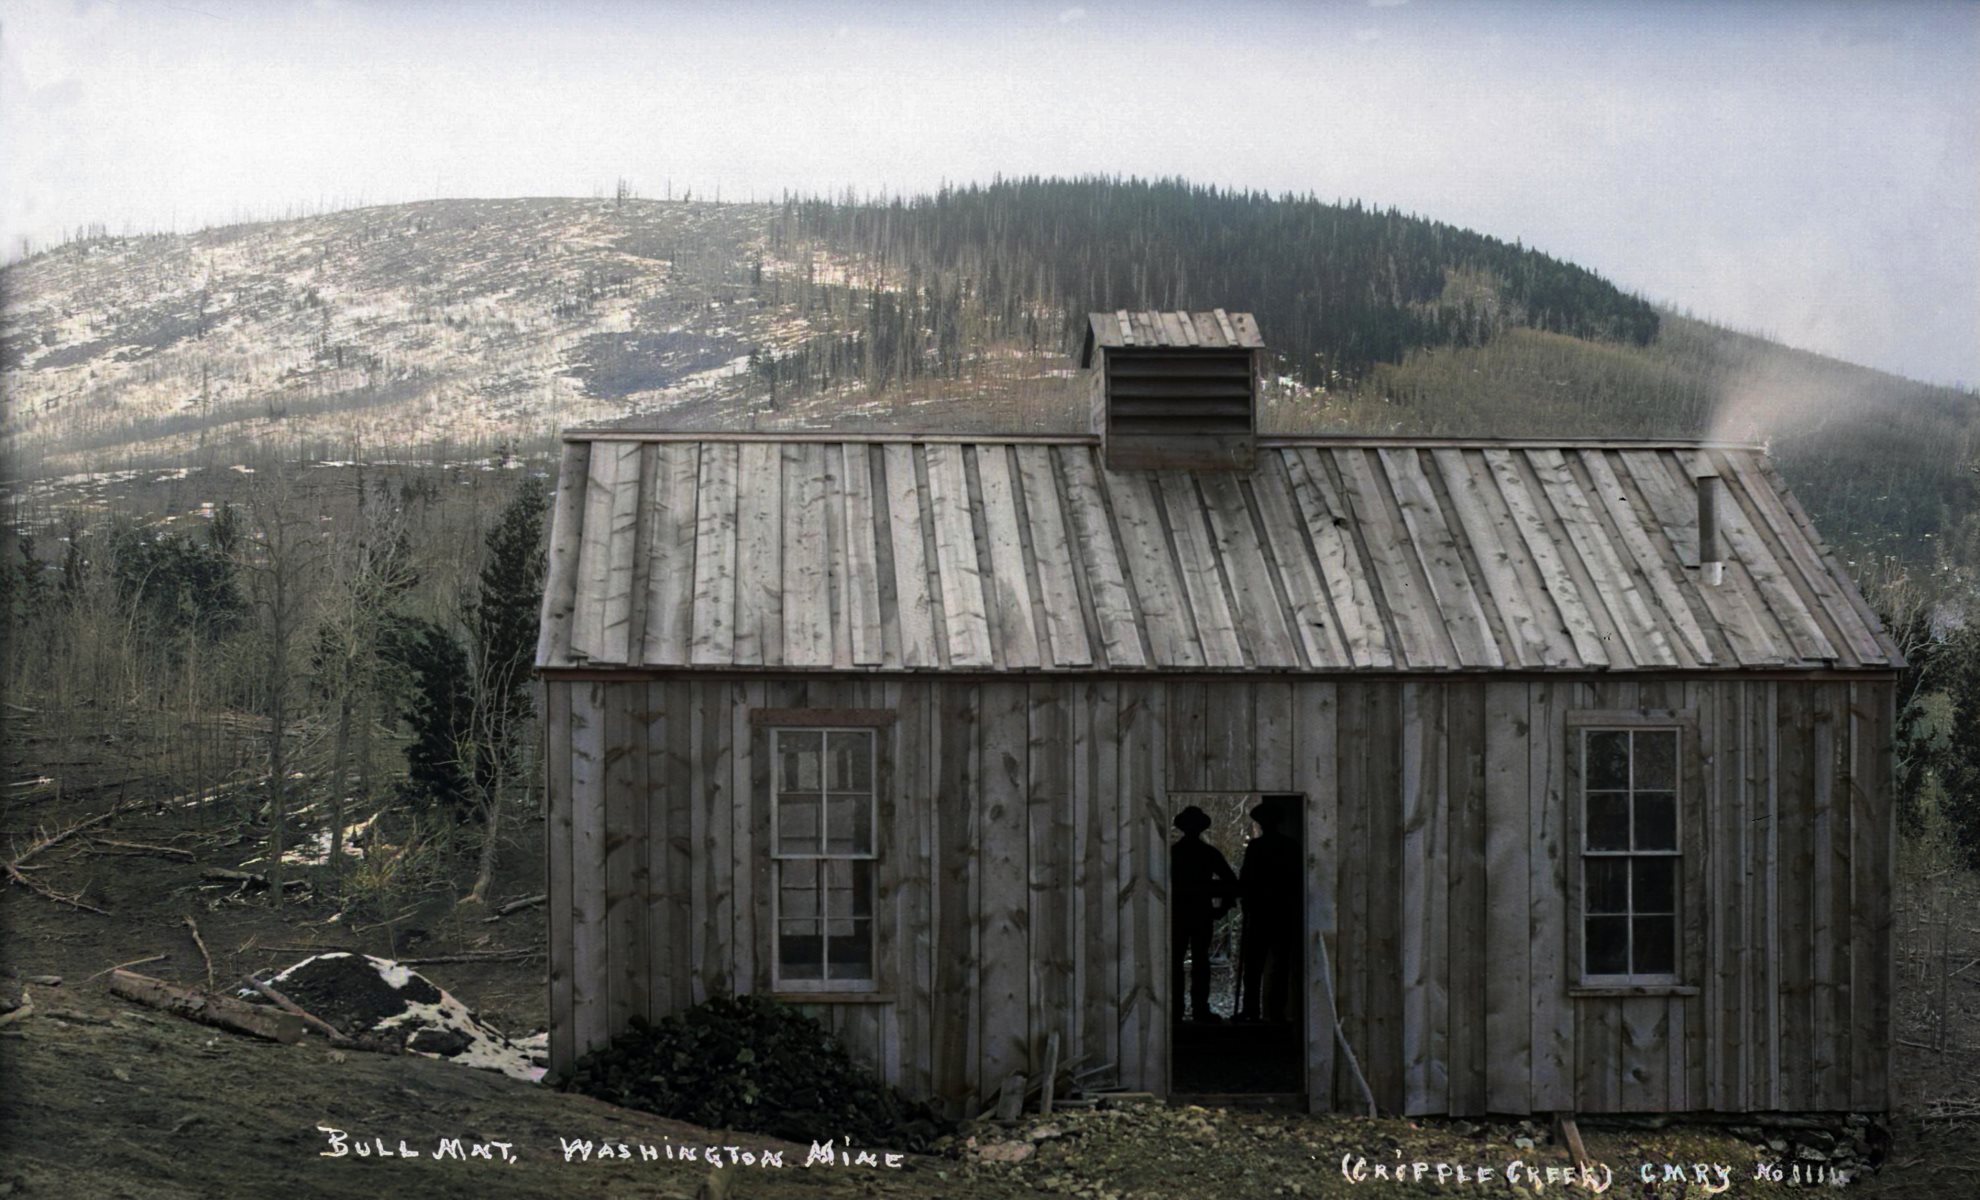 This is the only known photo type of the Washington Mine as per today (October 1, 2021) that I know about. Found on the Denver Public Library site (Call Number: X-62461). I just worked over the image to create this view. Photo is of a vertical board cabin with two double-hung windows and a doorway, said to be on Bull Mountain, but Battle Mountain it should be, as it shows the early Washington mine. Silhouettes of two men can be seen inside the cabin.
   I did procure the colored version of this image. Source was grayish, or in common speech black & white. Used an online service and tweaked and worked with image to get what looks best to my eyes at the moment.